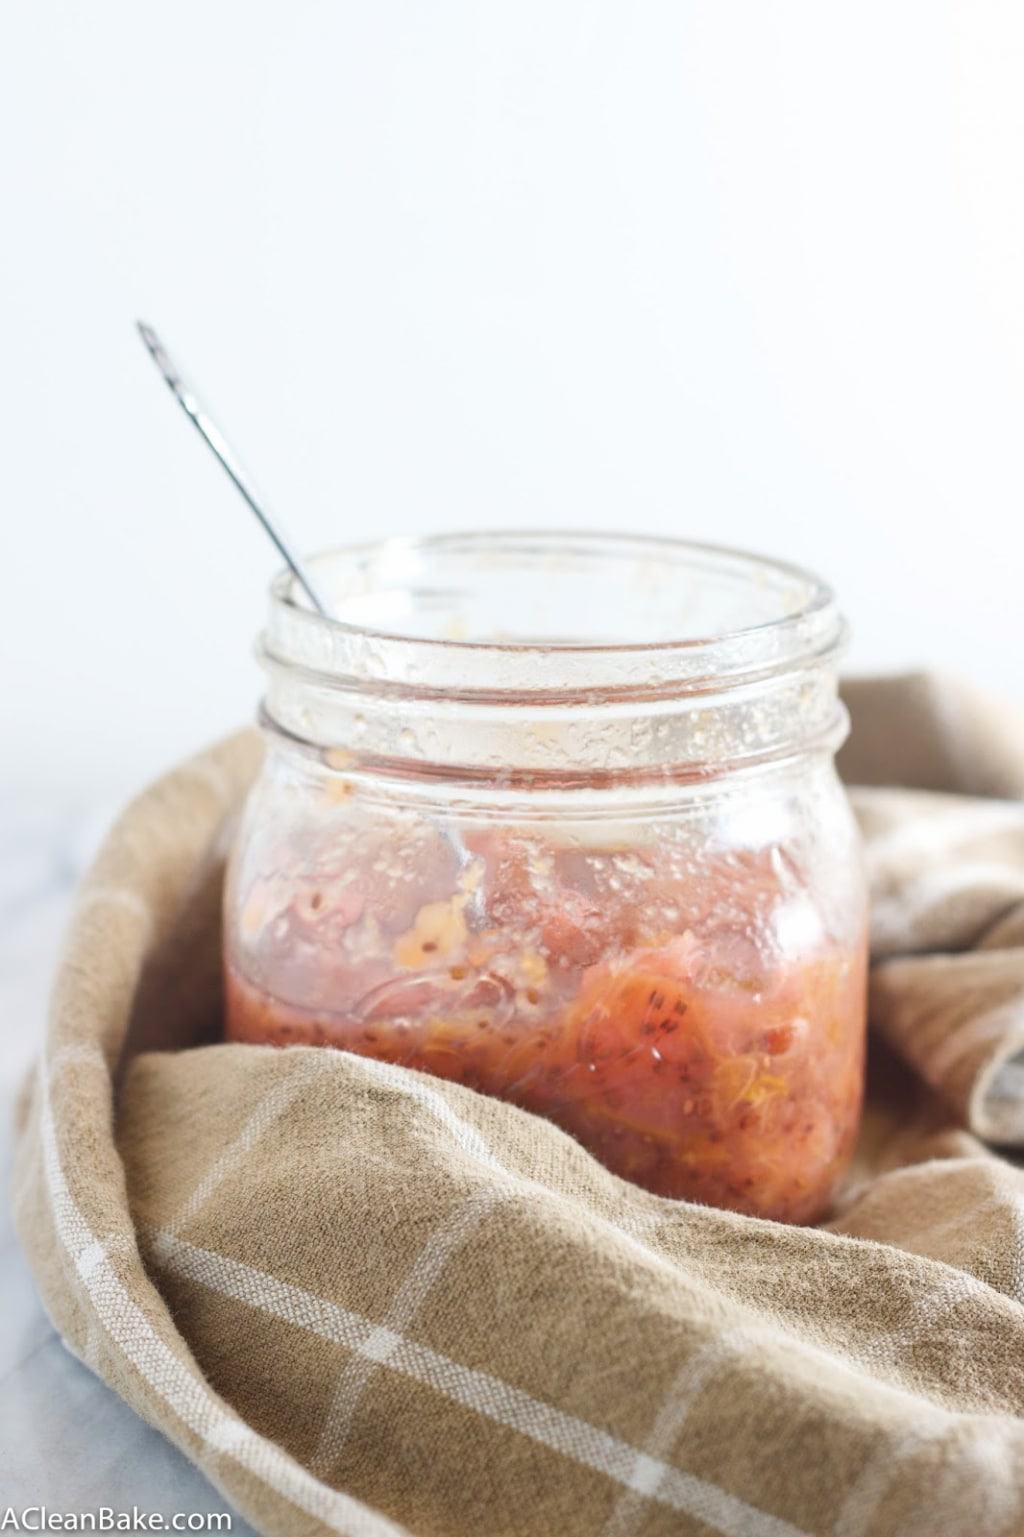 Easy sugar-free plum, pear and chia compote that is great for preserving summer flavors!